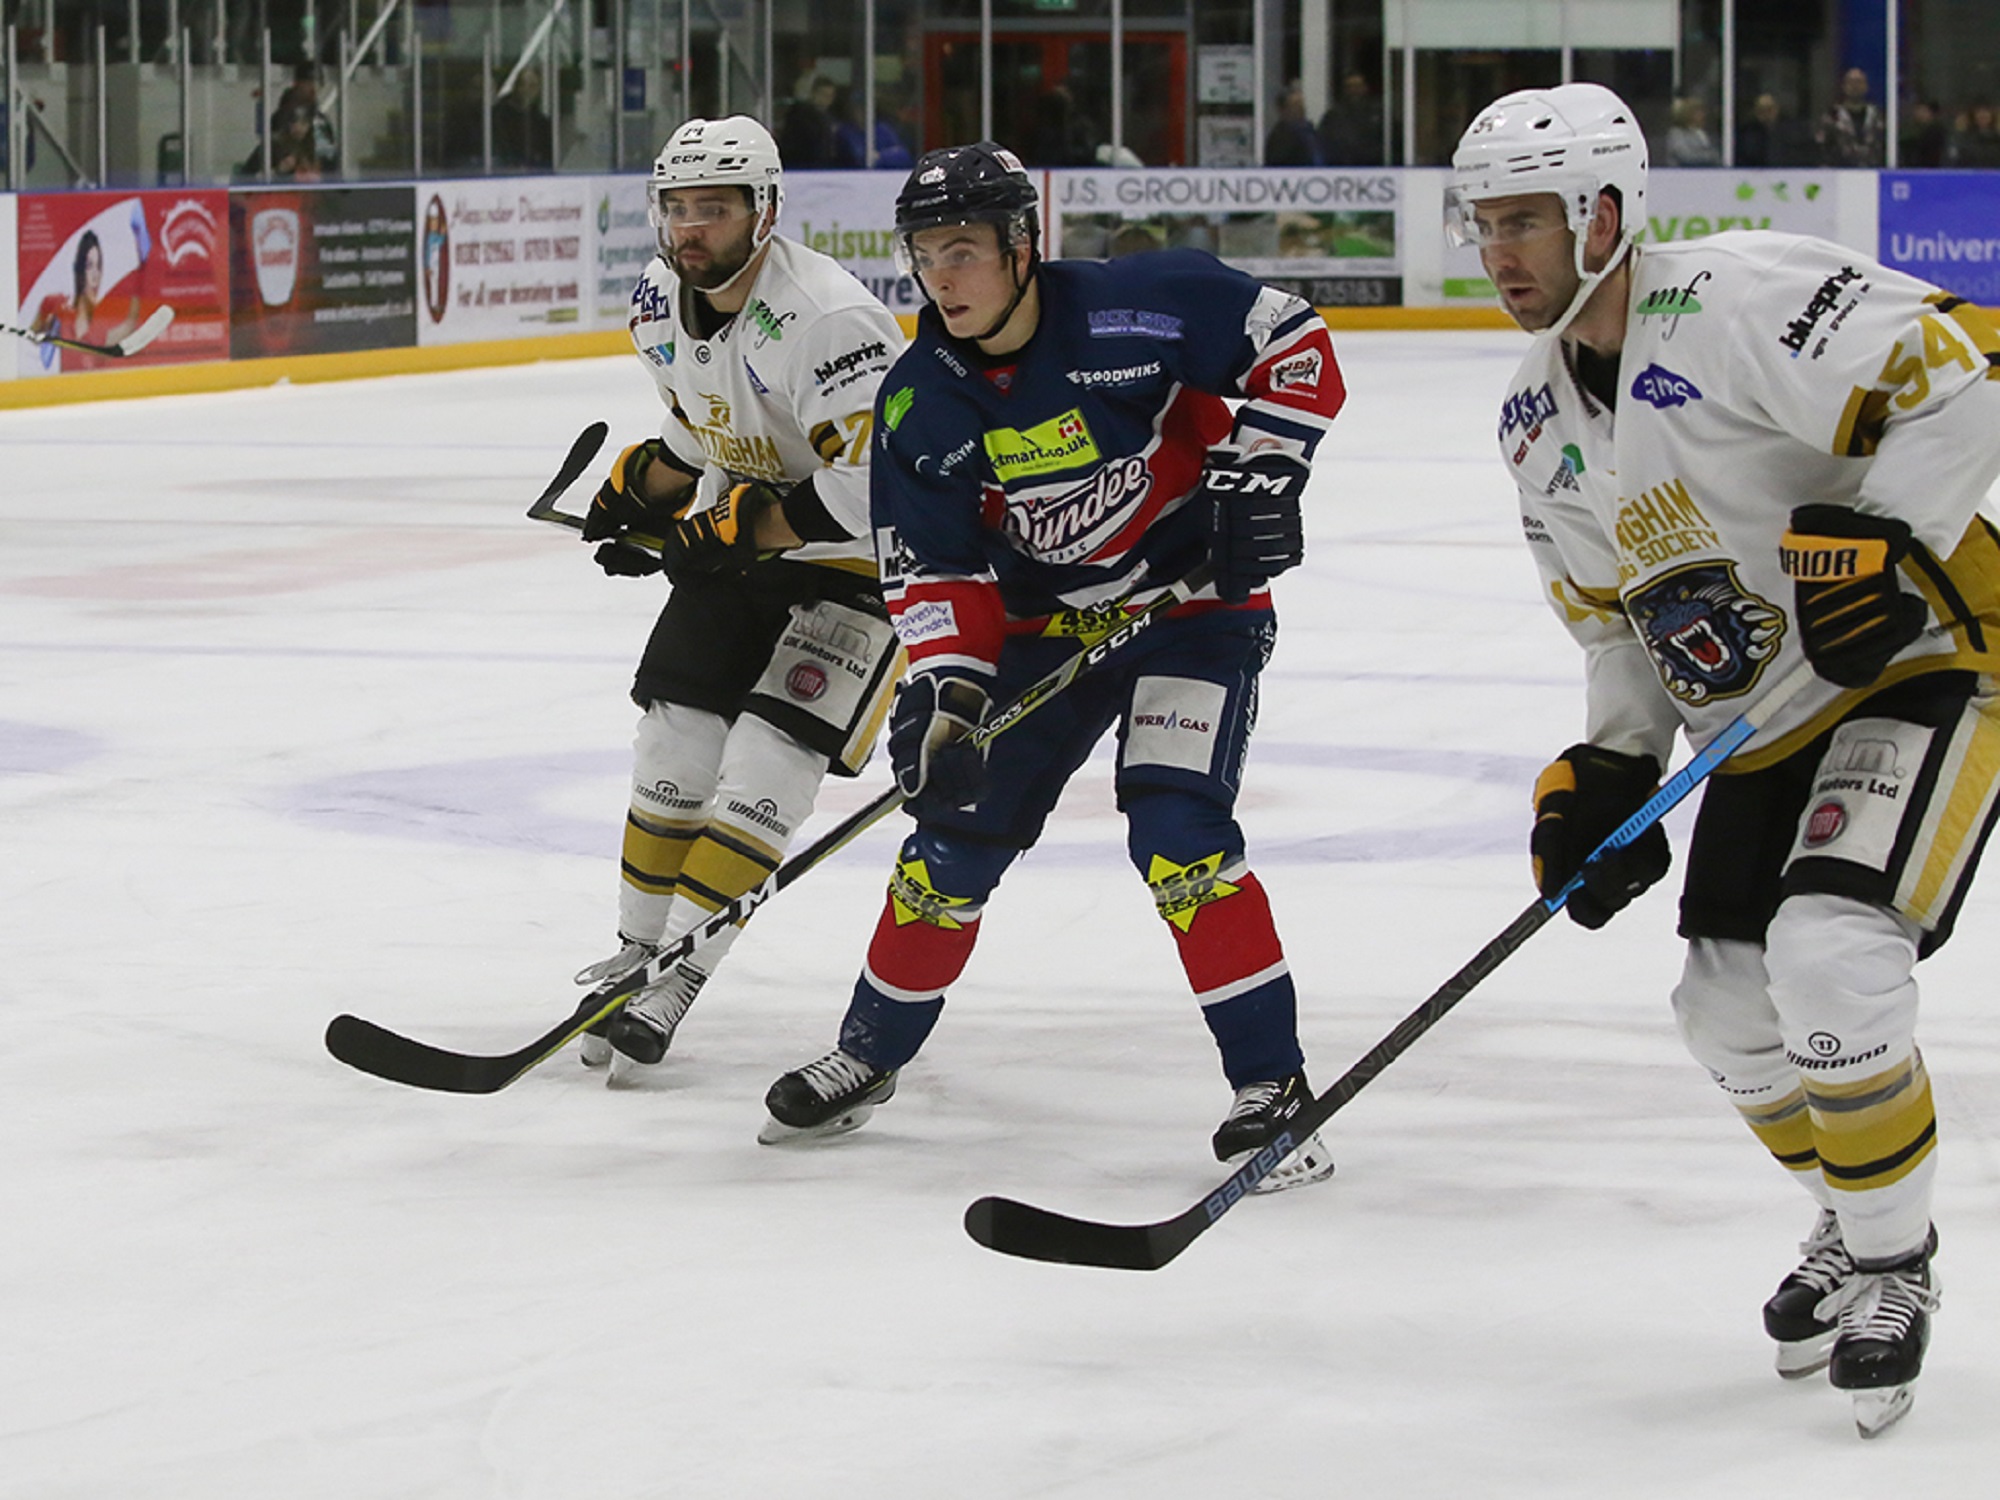 Panthers vs Stars: 4000 in the bowl! | 09/03/19 Top Image